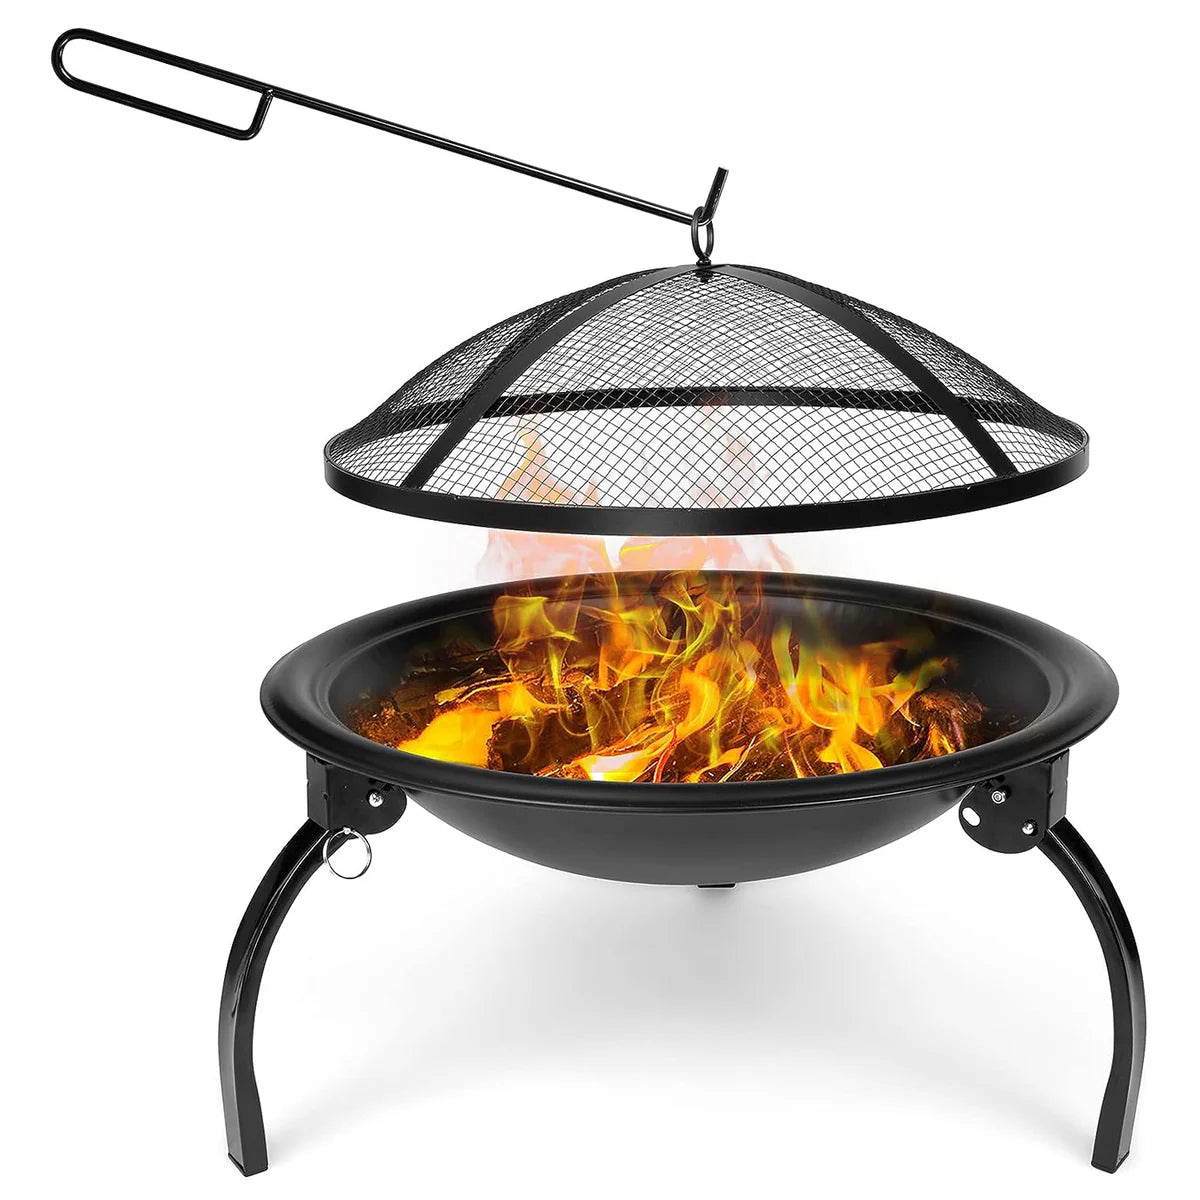 22" Round Foldable Outdoor Fire Pits Patio Garden Fireplace BBQ Grill with Spark Mesh Cover